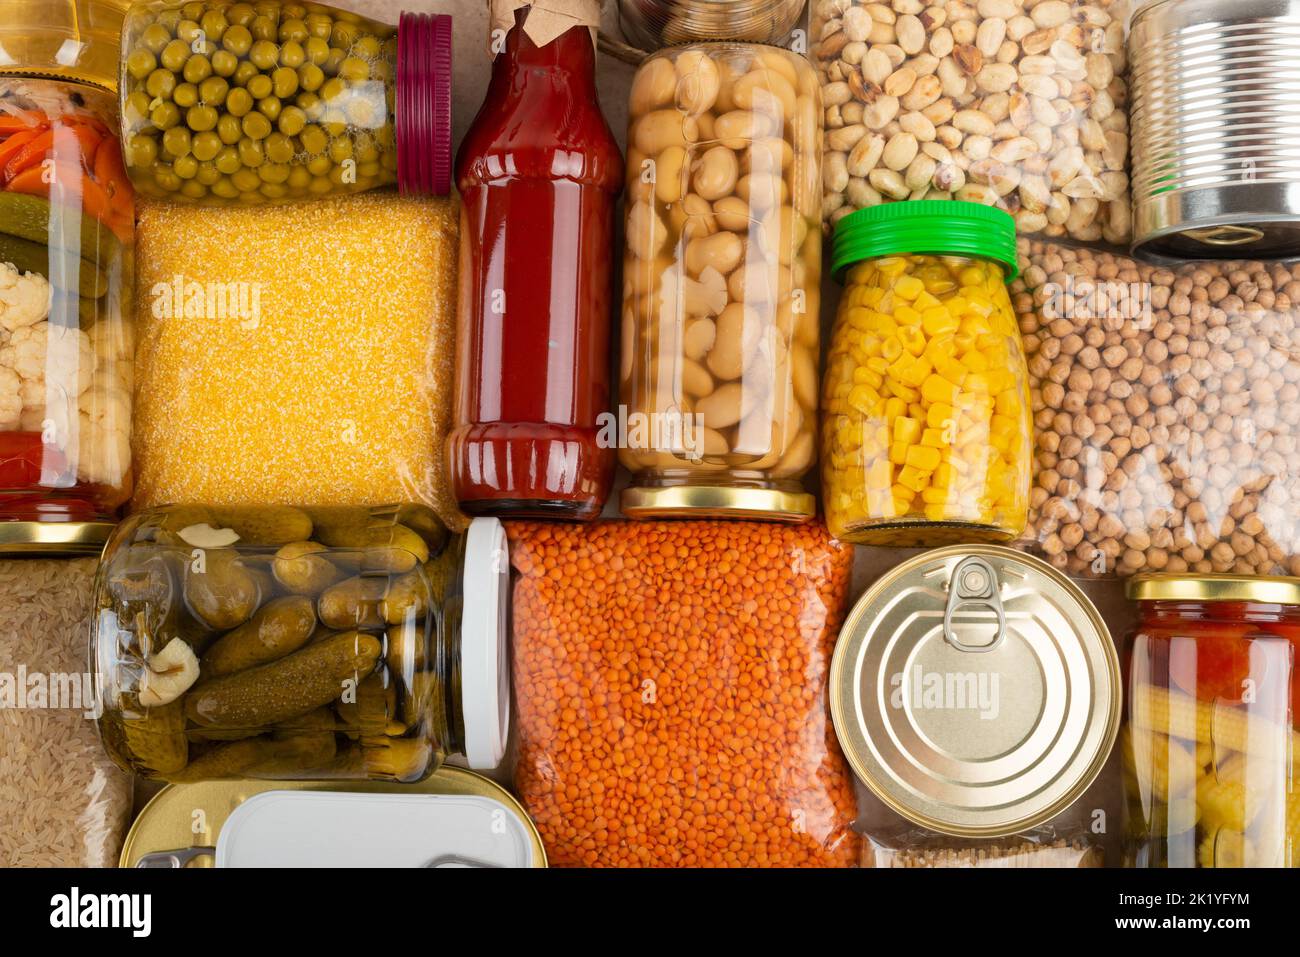 Emergency survival groceries on kitchen table closeup flat lay Stock Photo